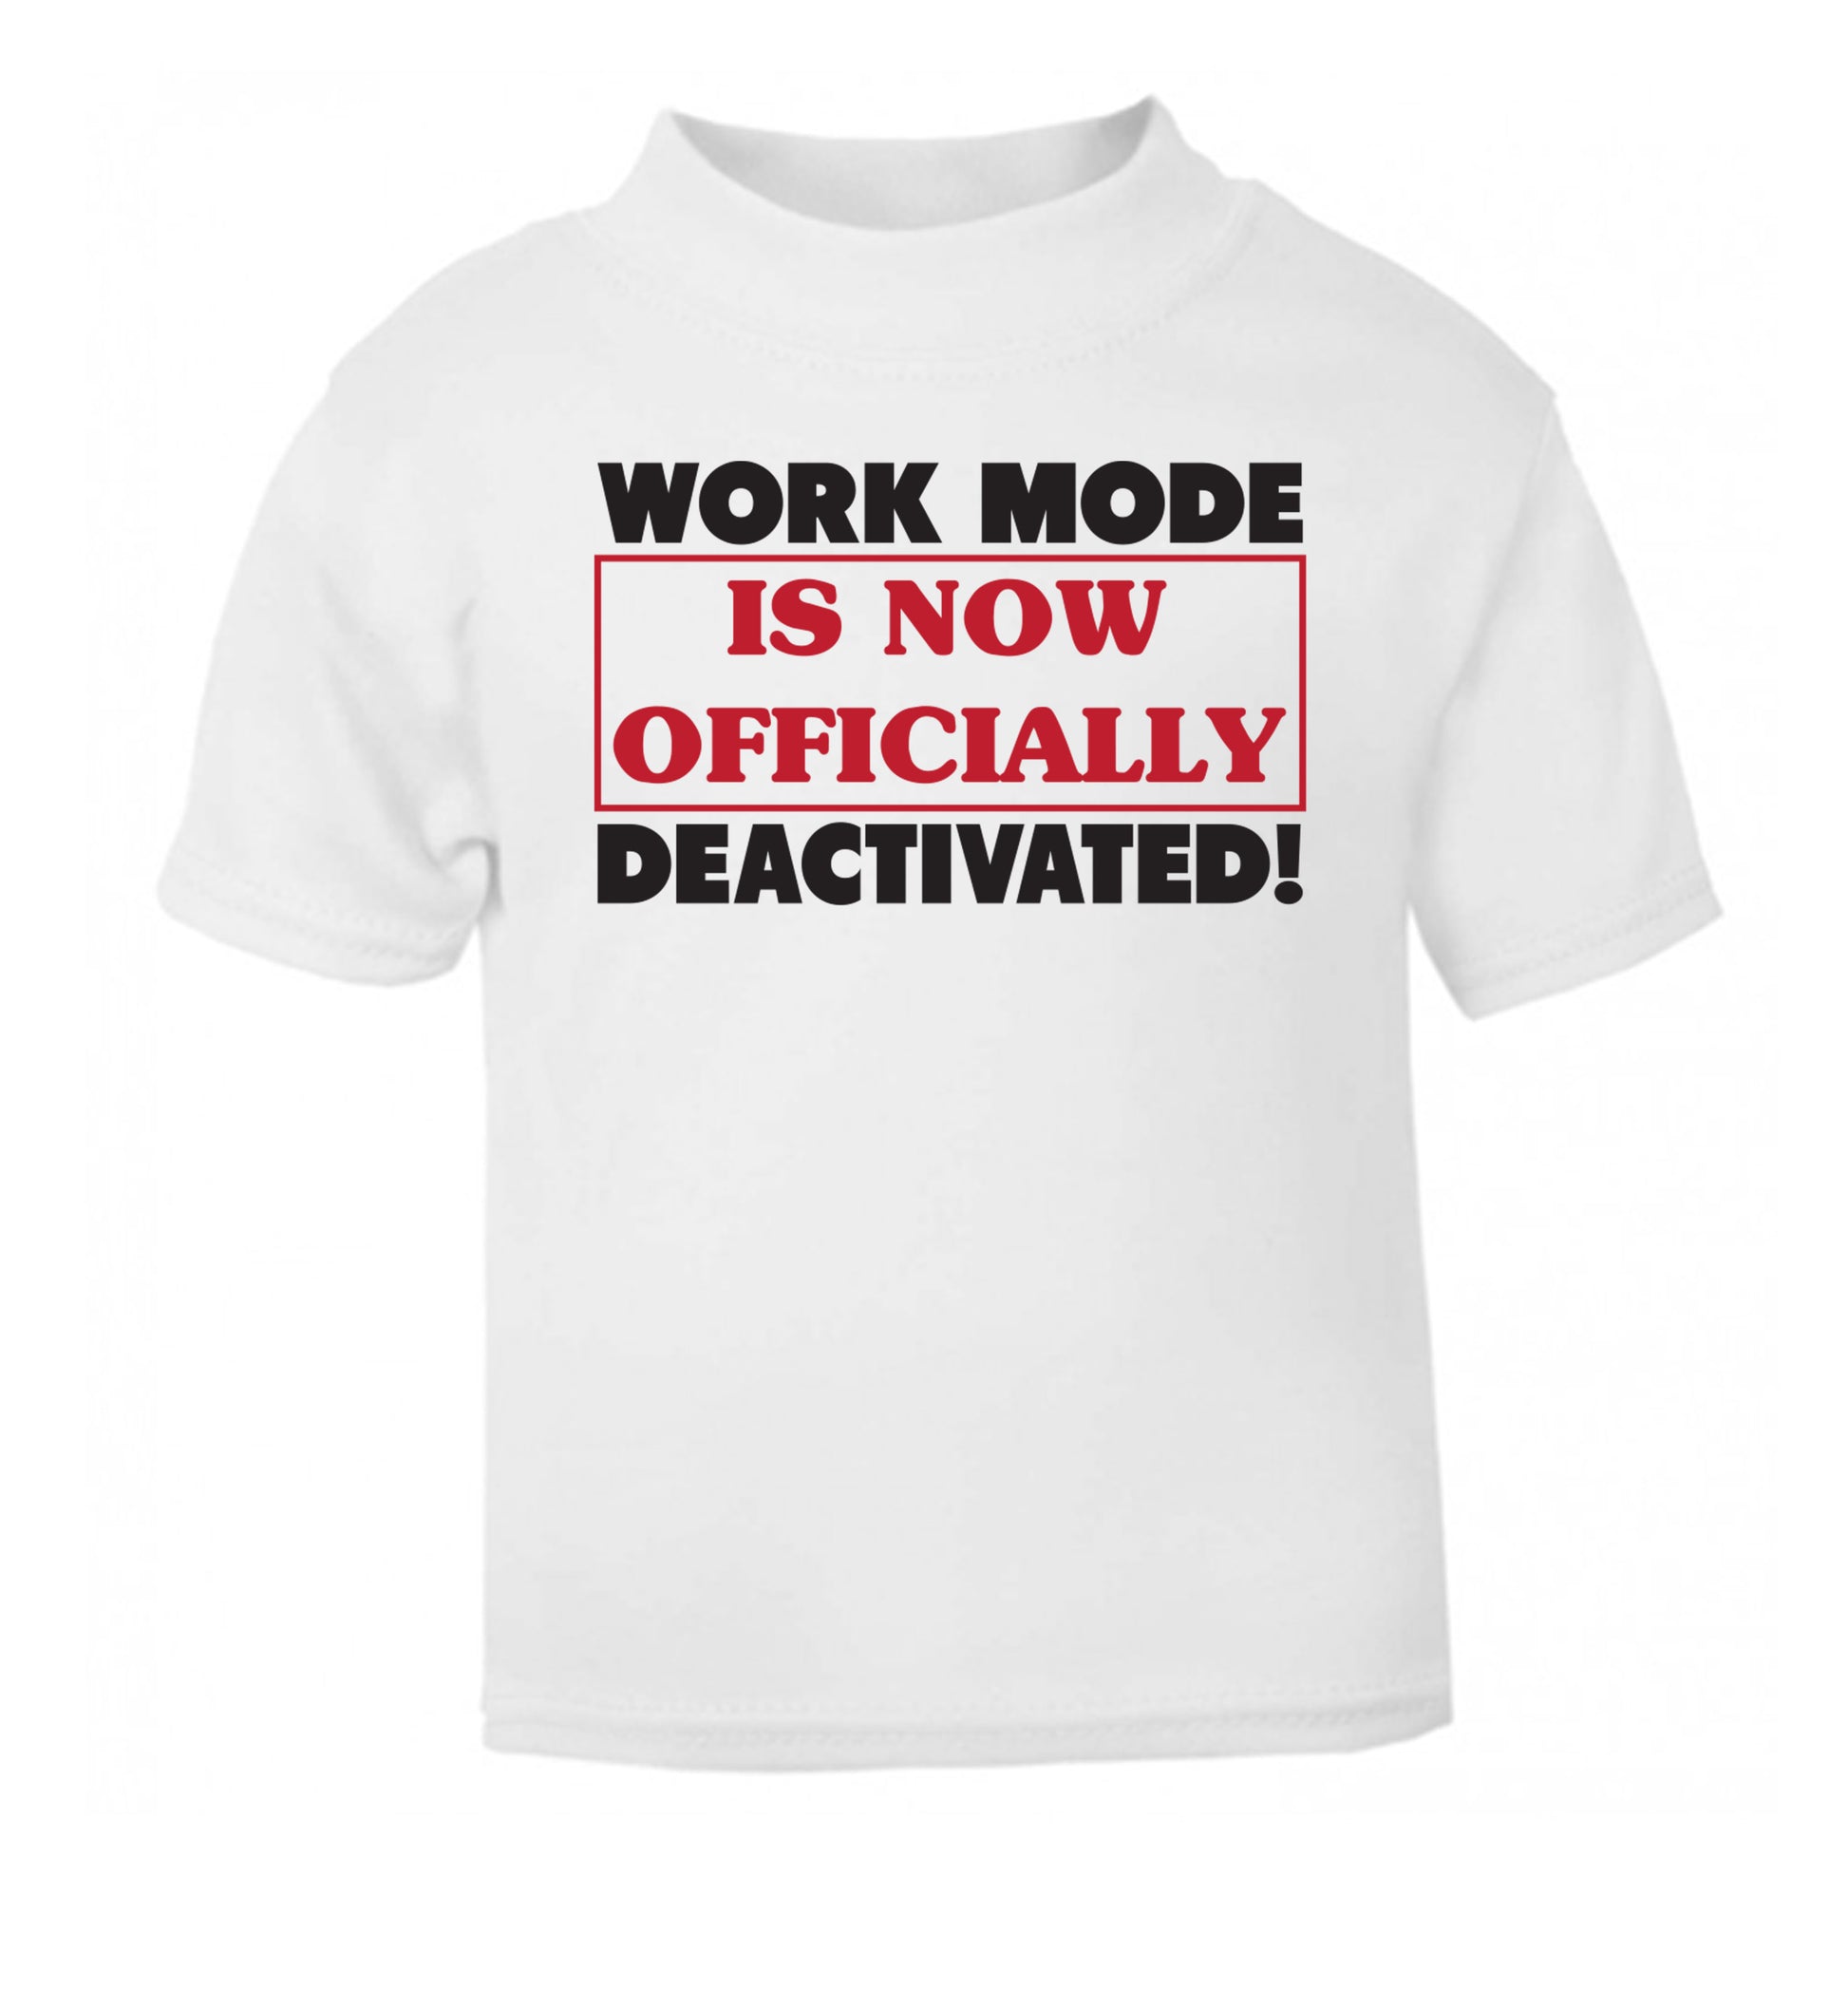 Work mode is now officially deactivated white Baby Toddler Tshirt 2 Years